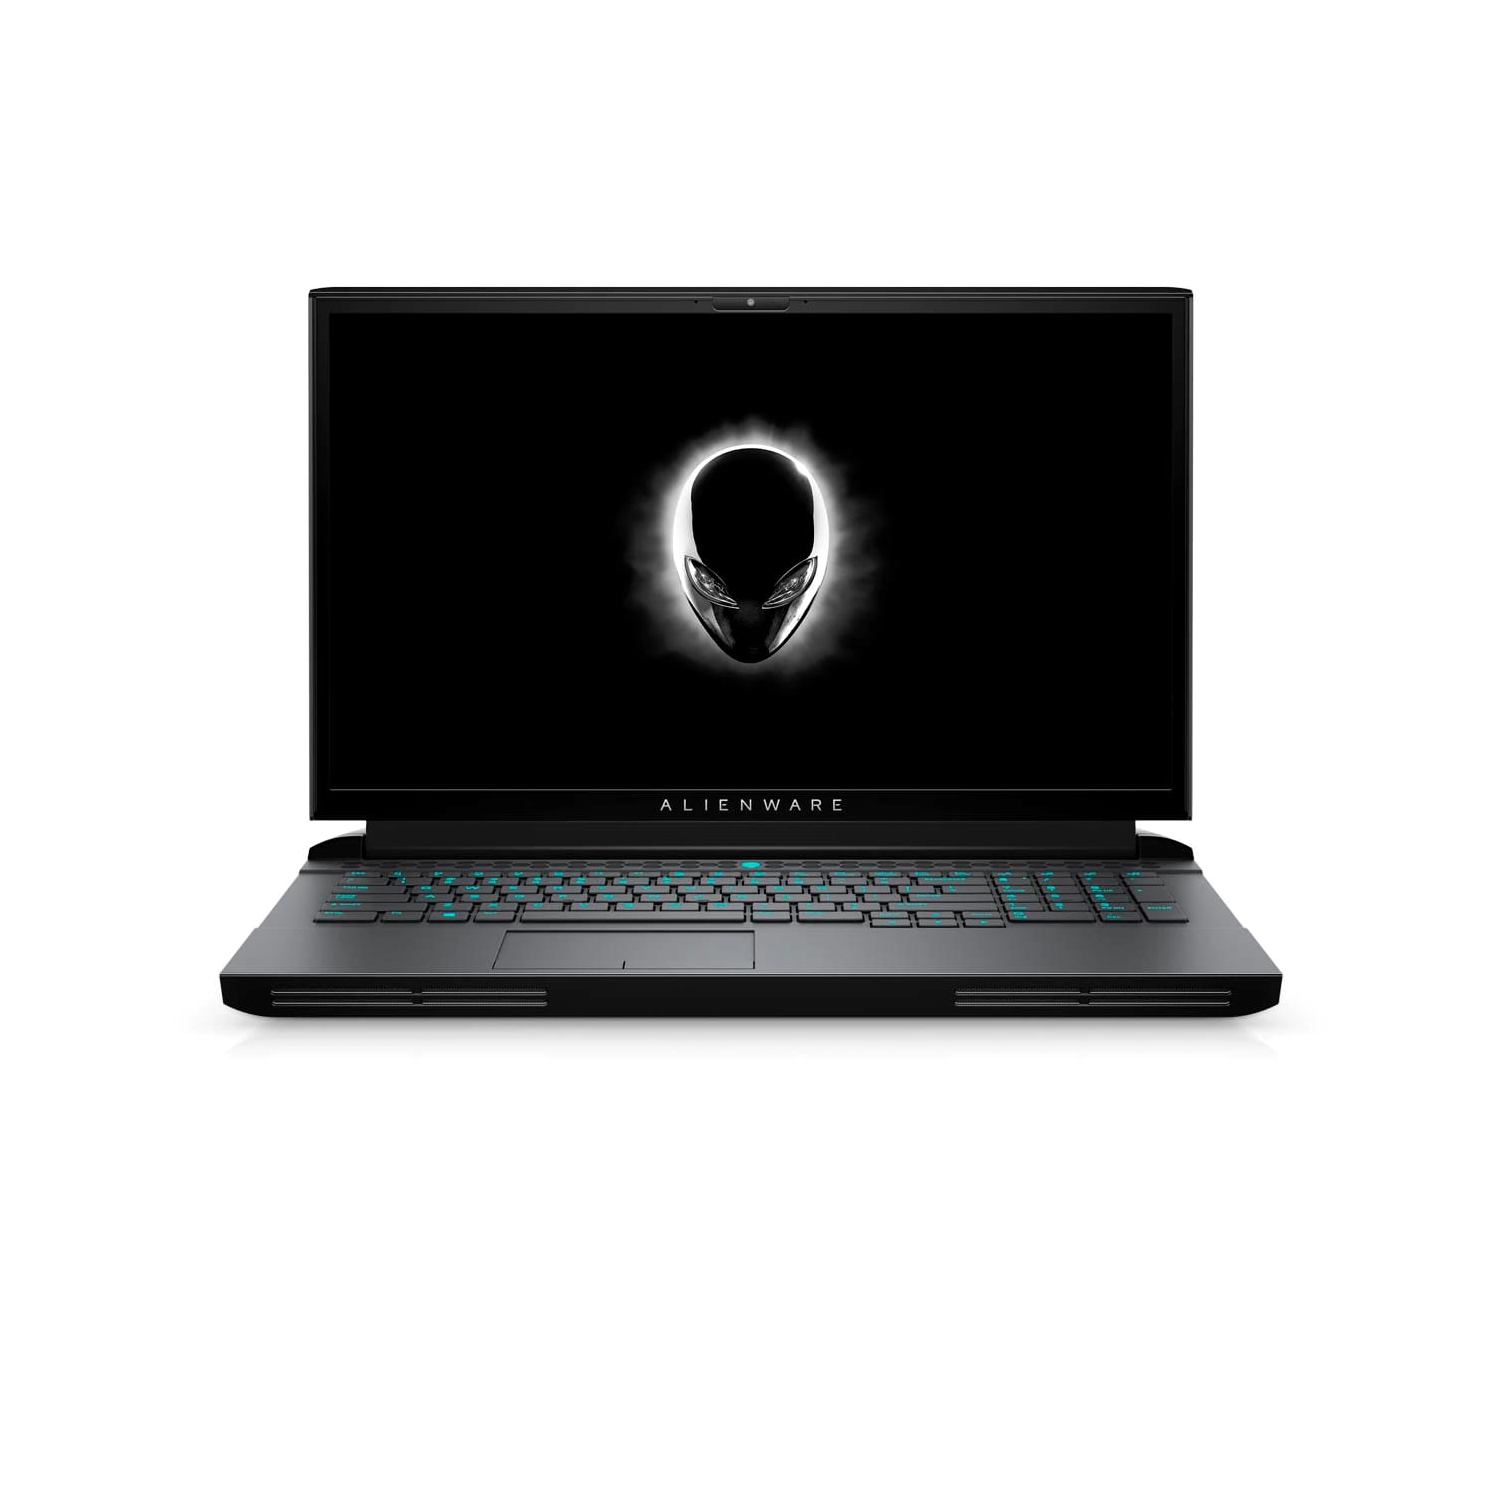 Refurbished (Excellent) - Dell Alienware 17 51m R2 Gaming Laptop (2020), 17.3" FHD, Core i7, 2TB SSD, 32GB RAM, 2070 Super, 8 Cores @ 5.1 GHz, 10th Gen CPU Certified